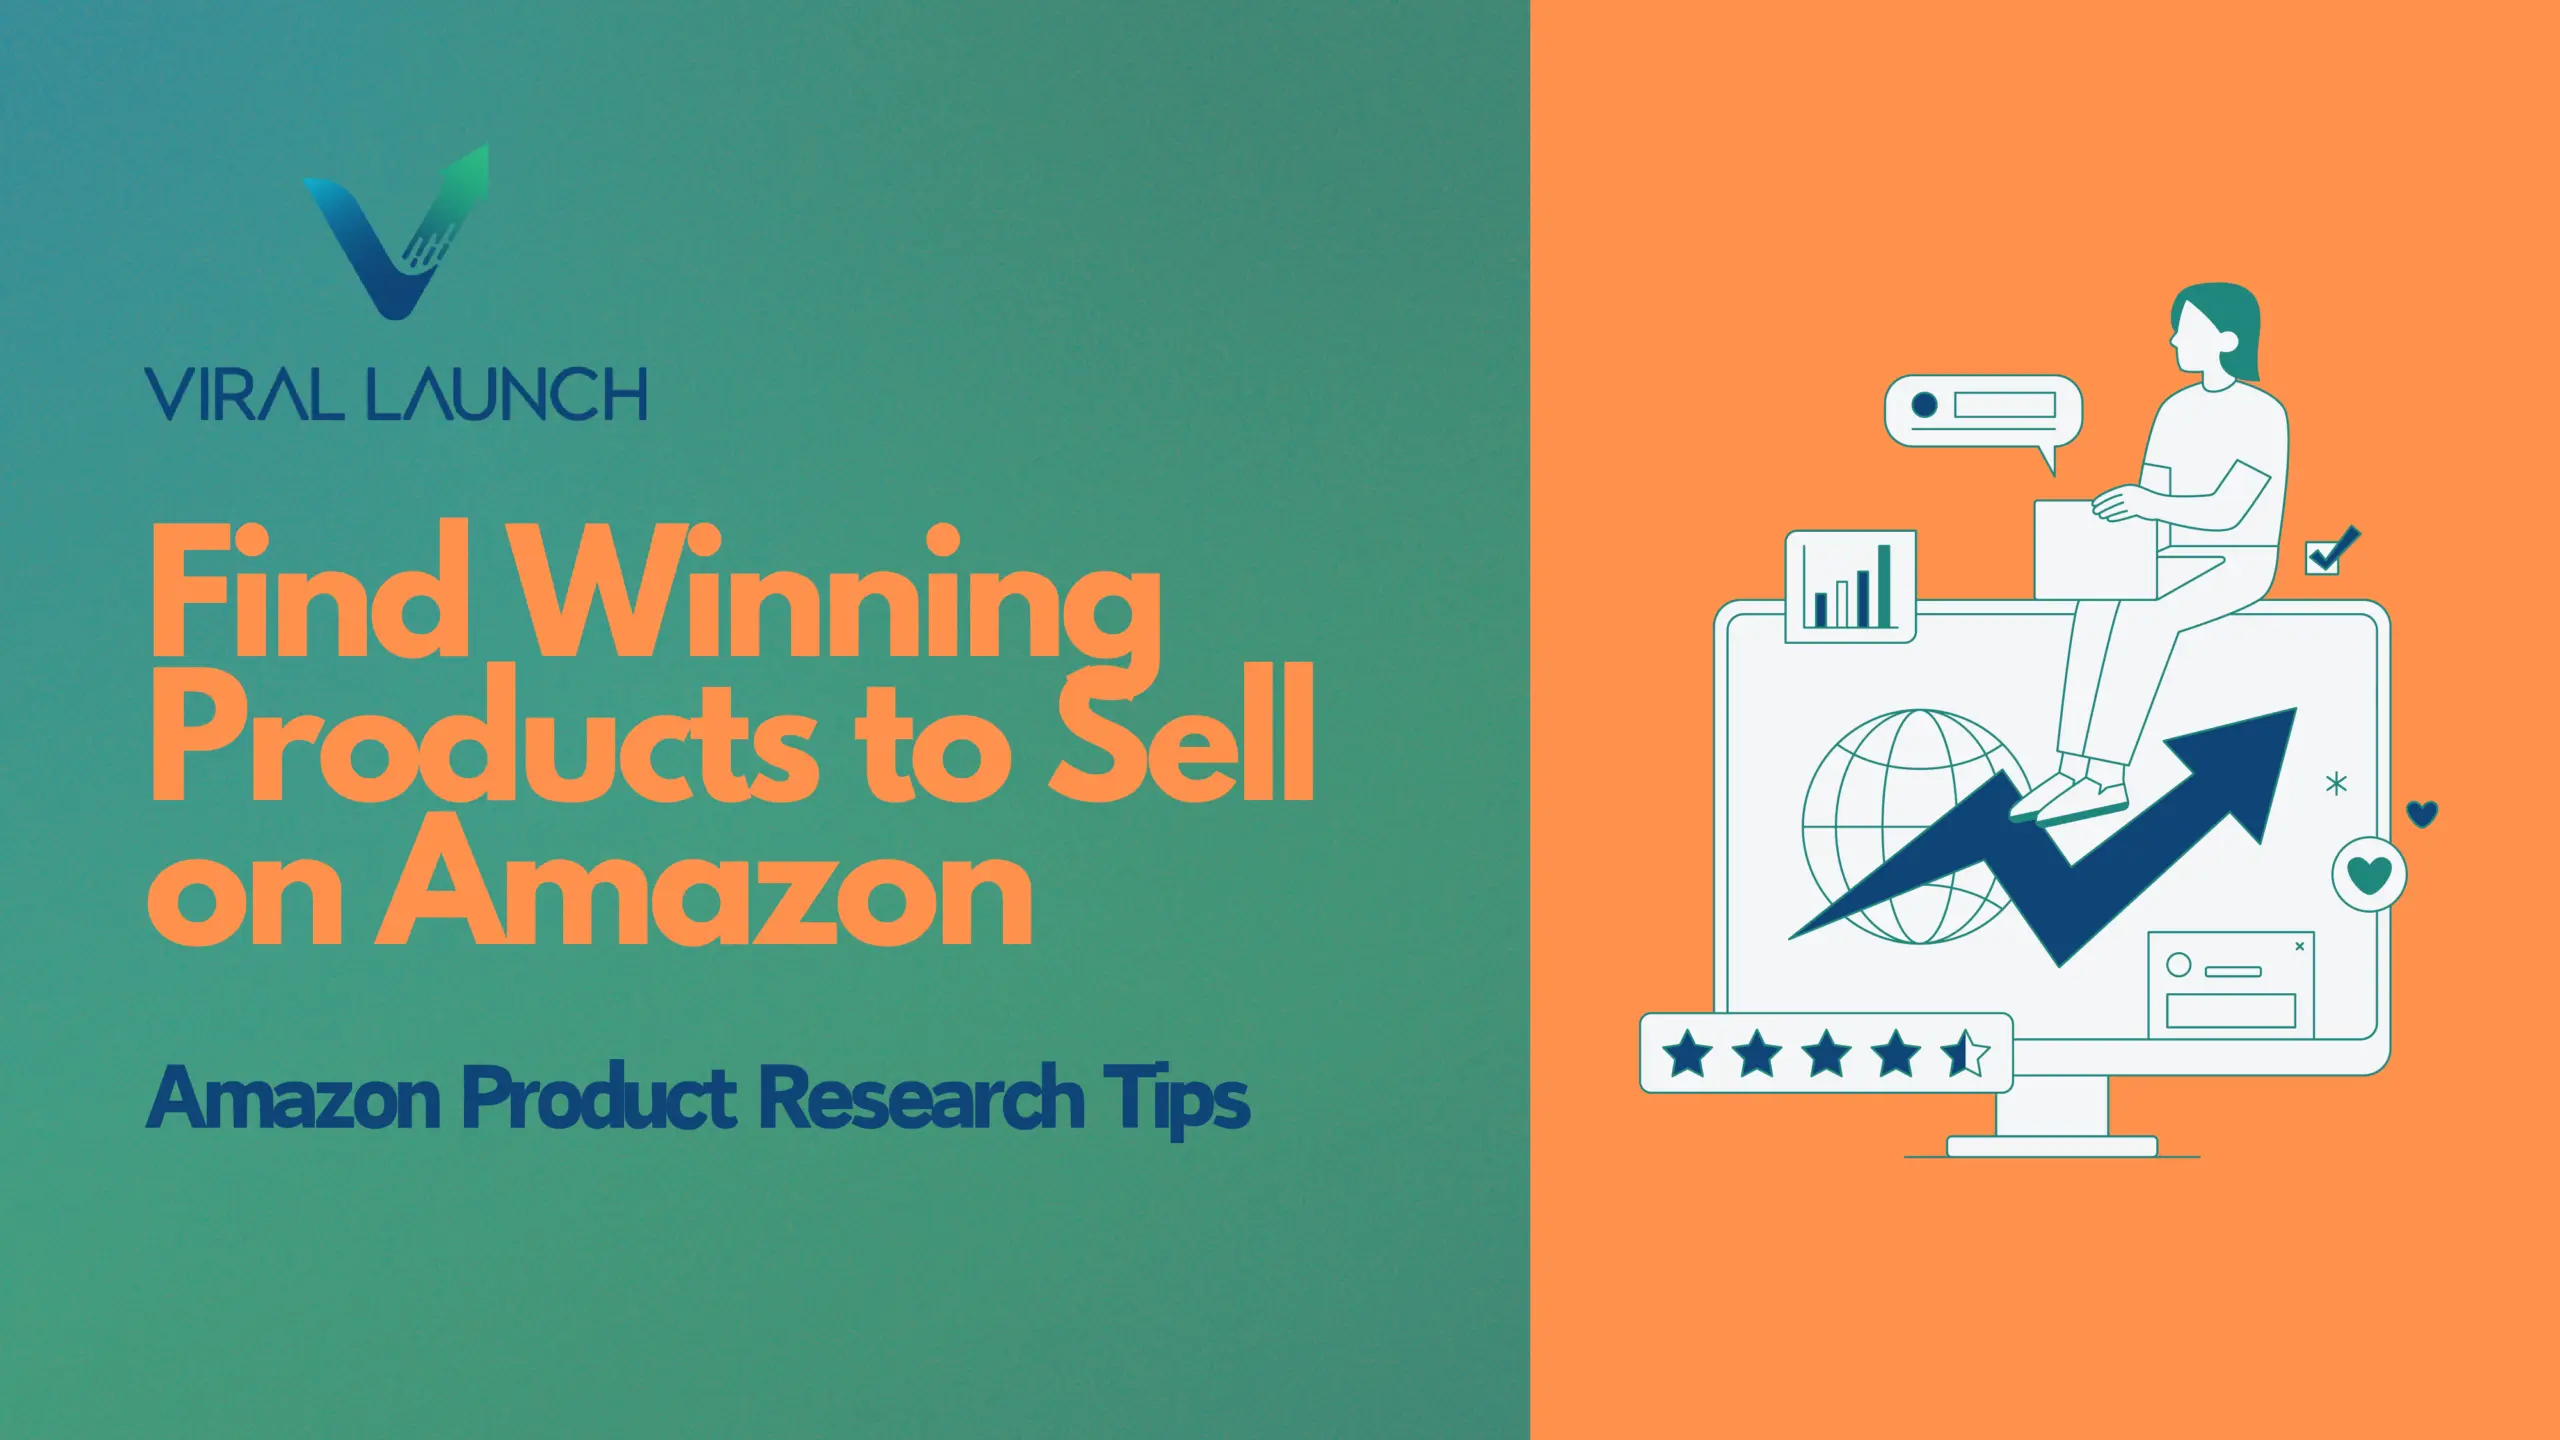 Find Winning Products to Sell on Amazon